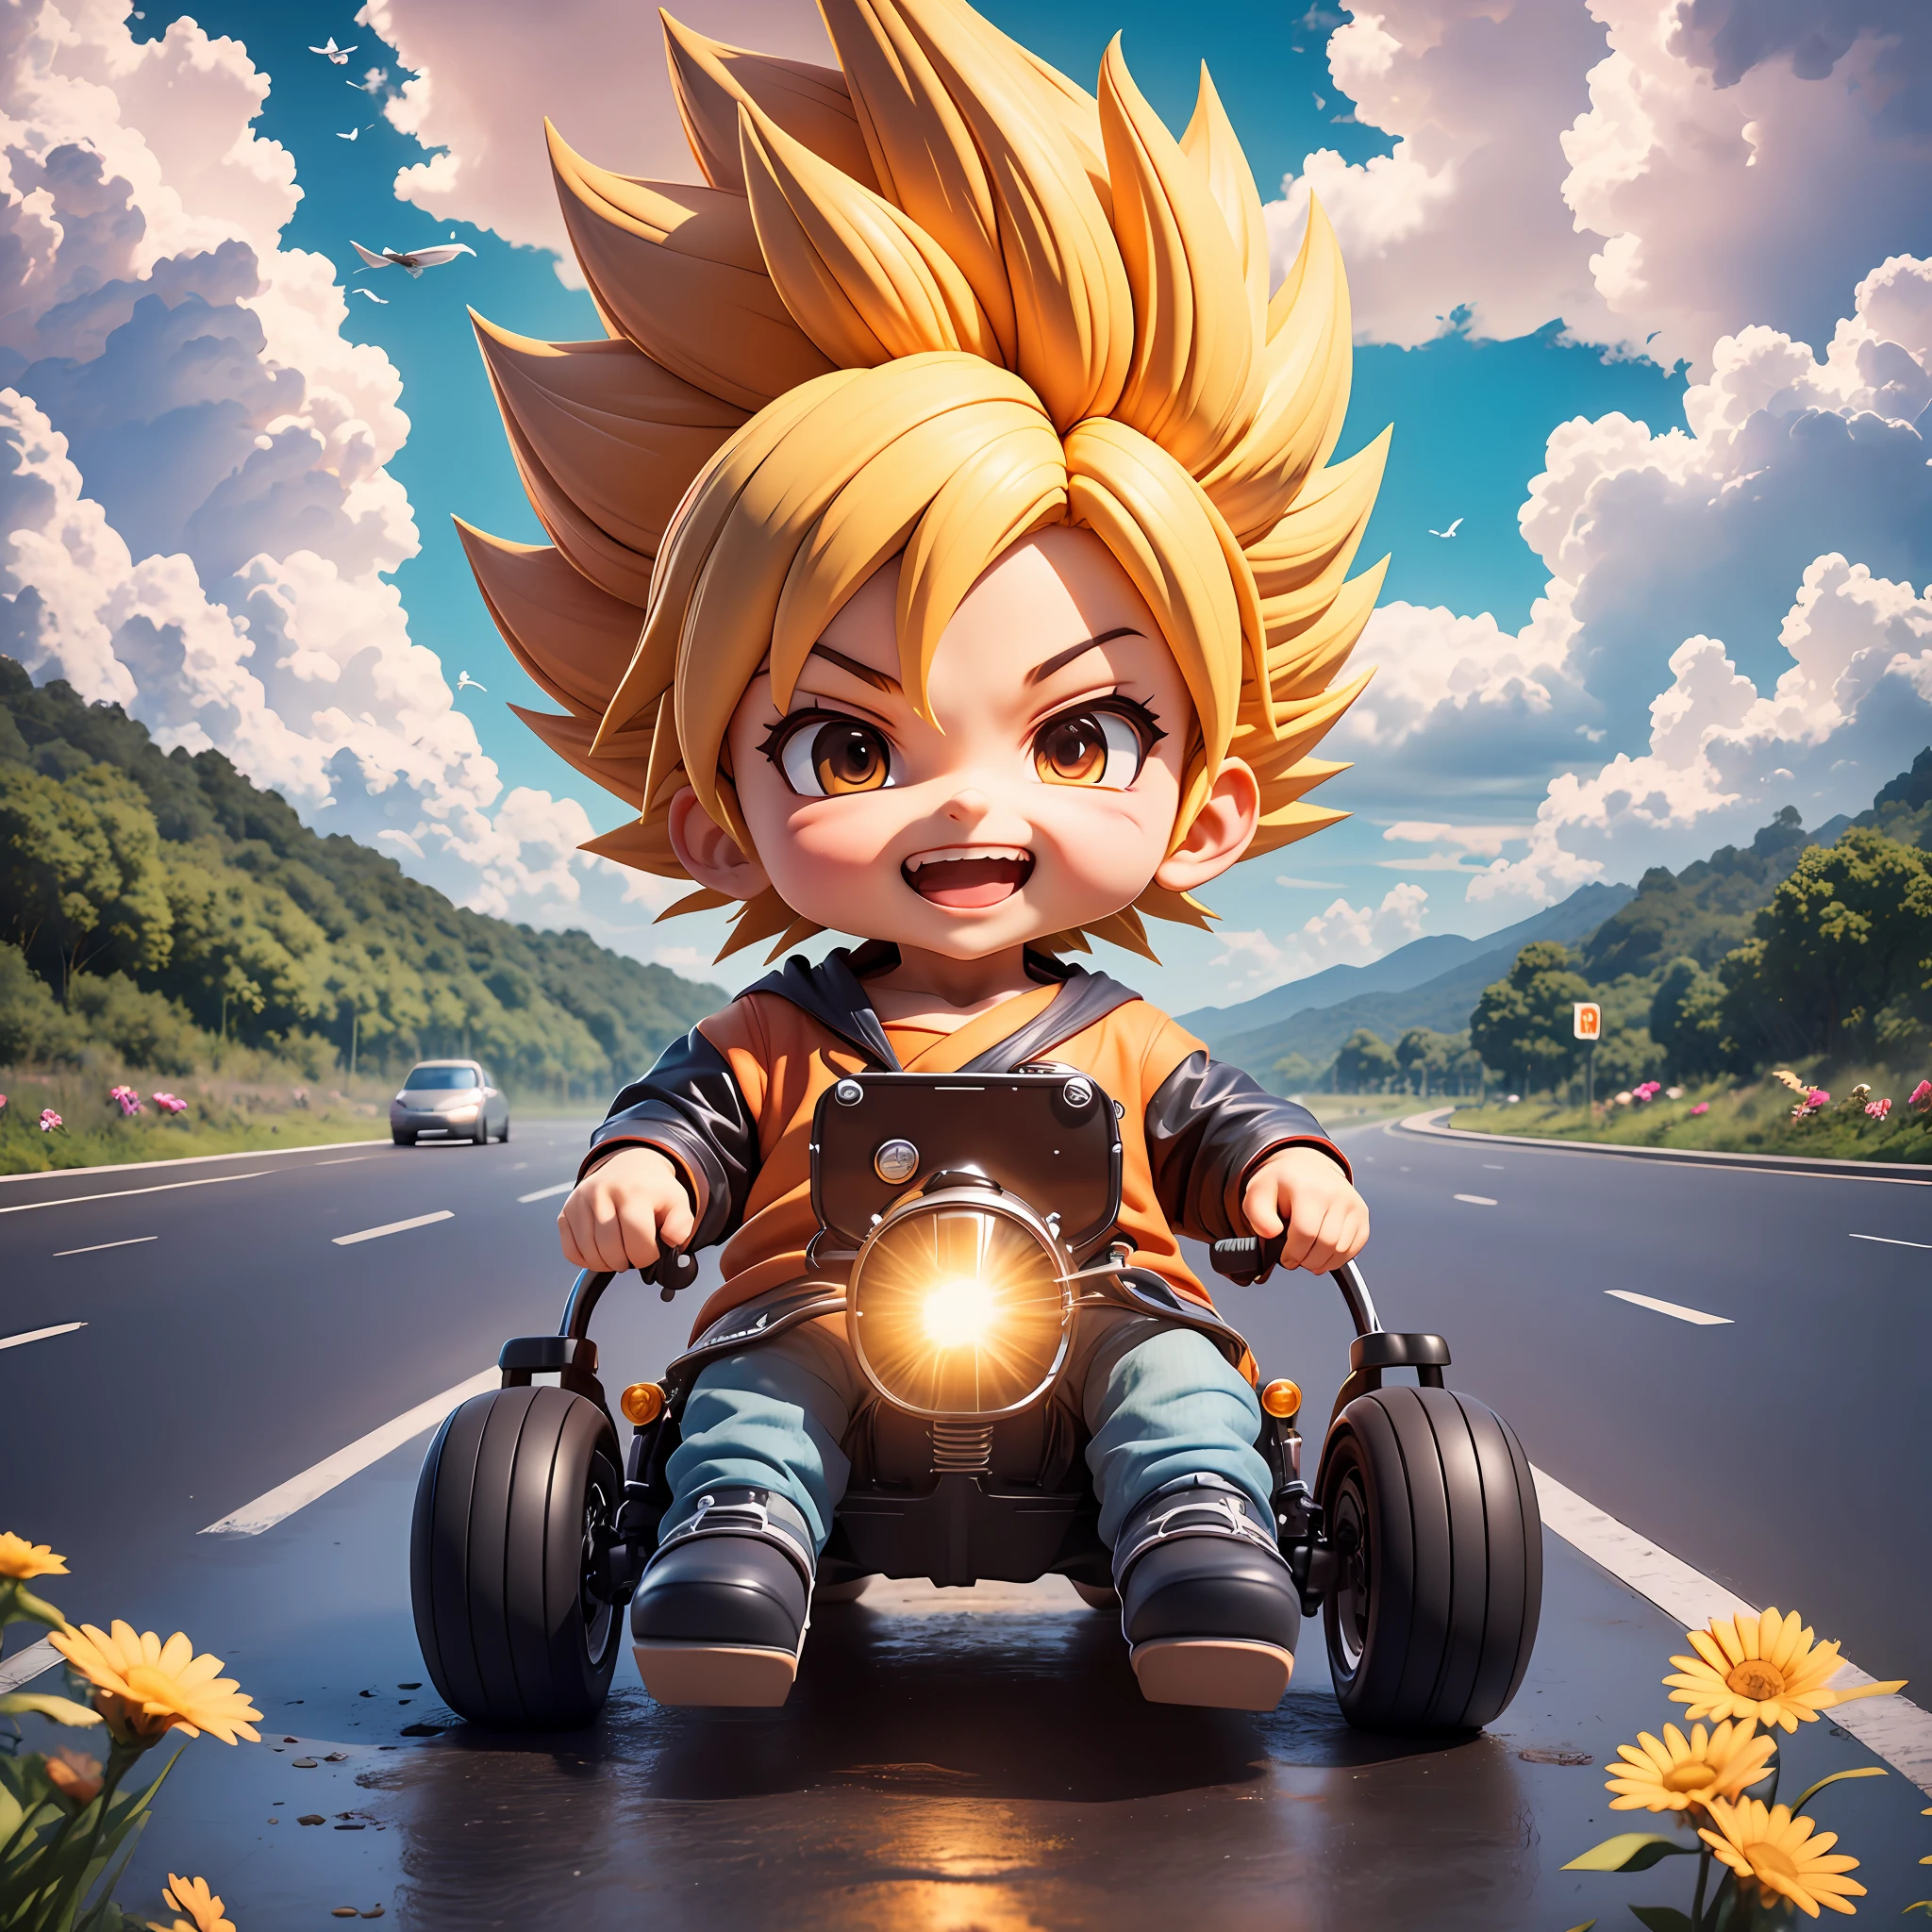 rains，Clouds，sunrays，highway，Little boy driving a car，son goku，SuperSaiyan，big laughter，Spiked hairstyle，Flowers，yama，kali，The bird，full full body，Rich colors，chibi